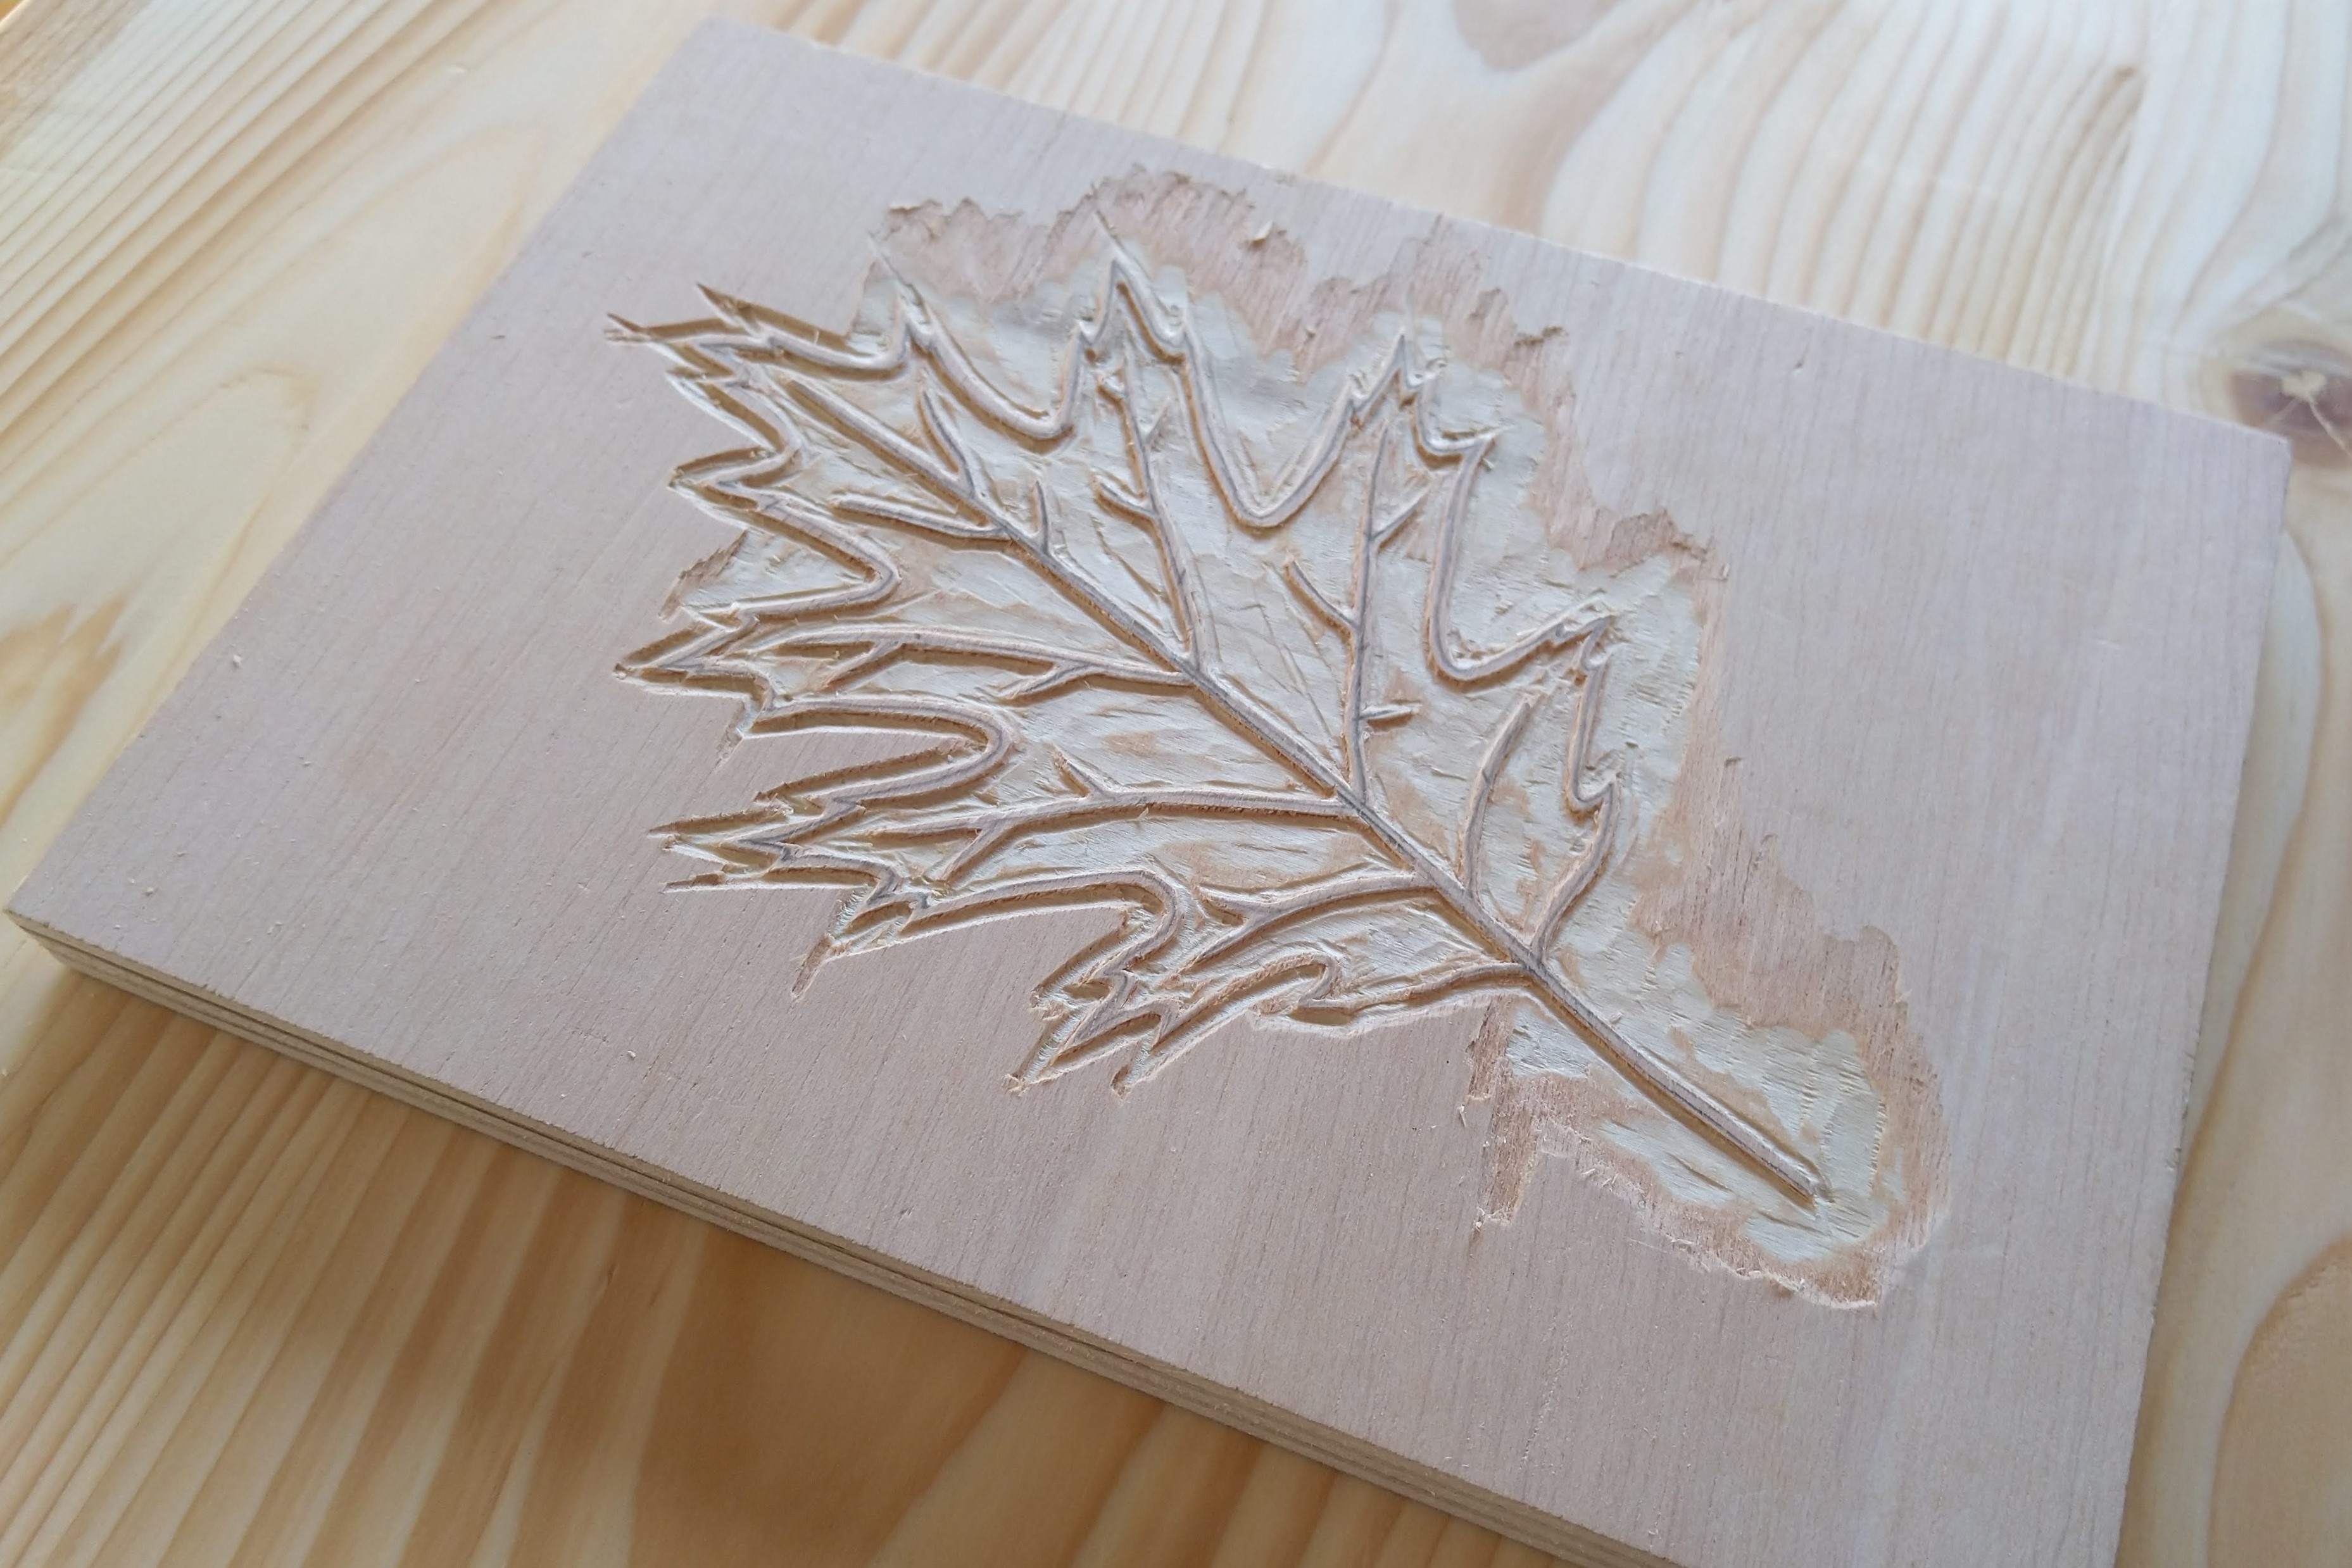 Best wood for woodblock printing: How to choose and prepare blocks for woodcut